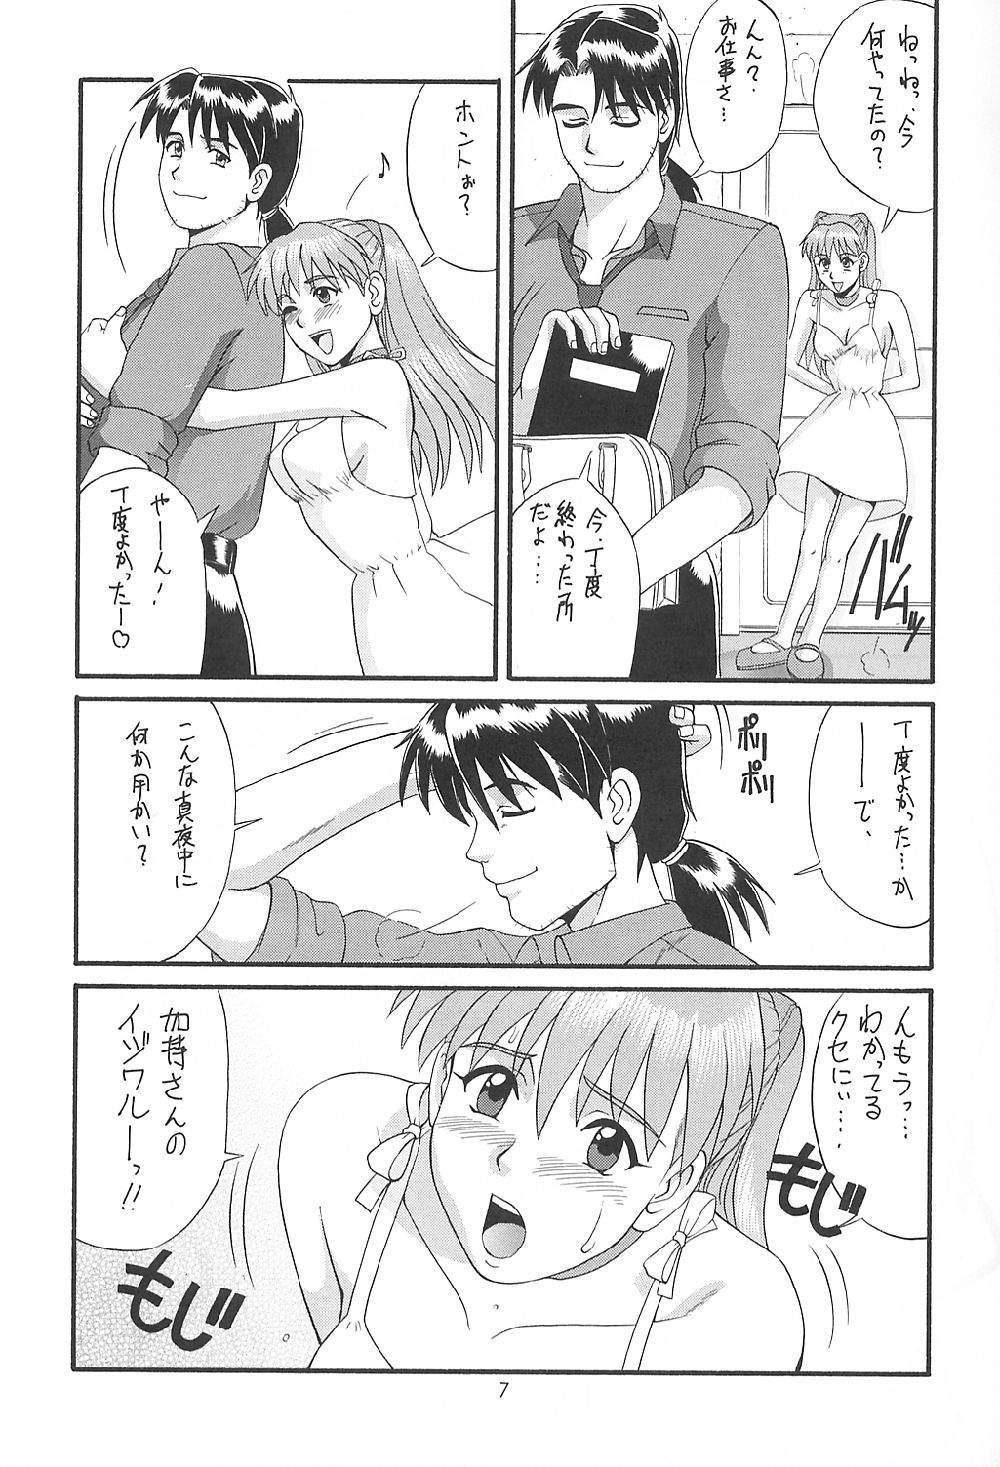 Sex Feel My Vibe Shinteiban - Neon genesis evangelion Action - Page 6